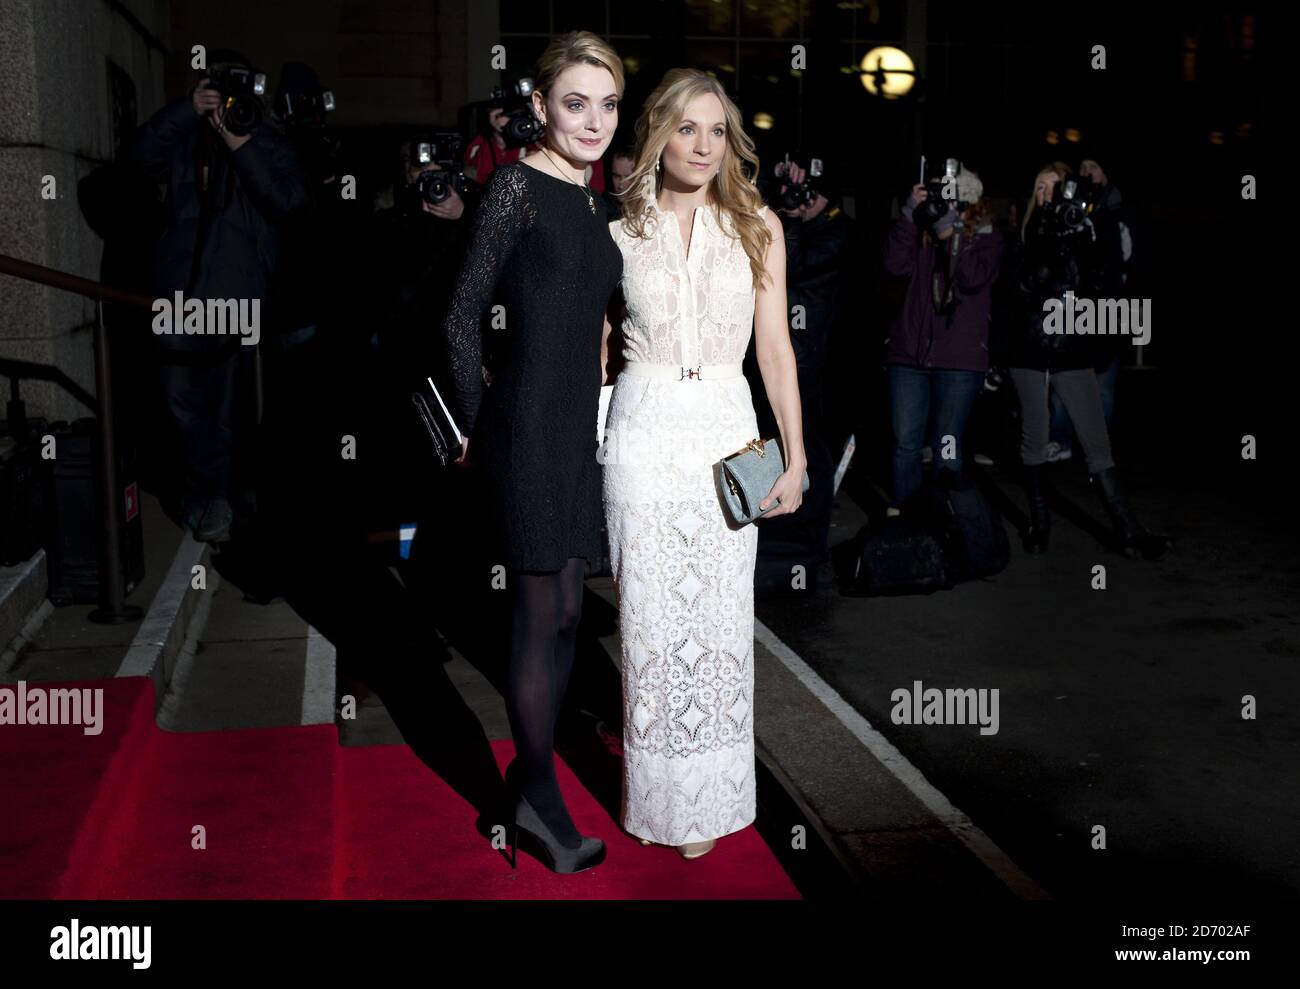 Christine Bottomley and Joanne Froggatt arriving at the Evening Standard British Film Awards 2012, at the London Film Museum. Stock Photo